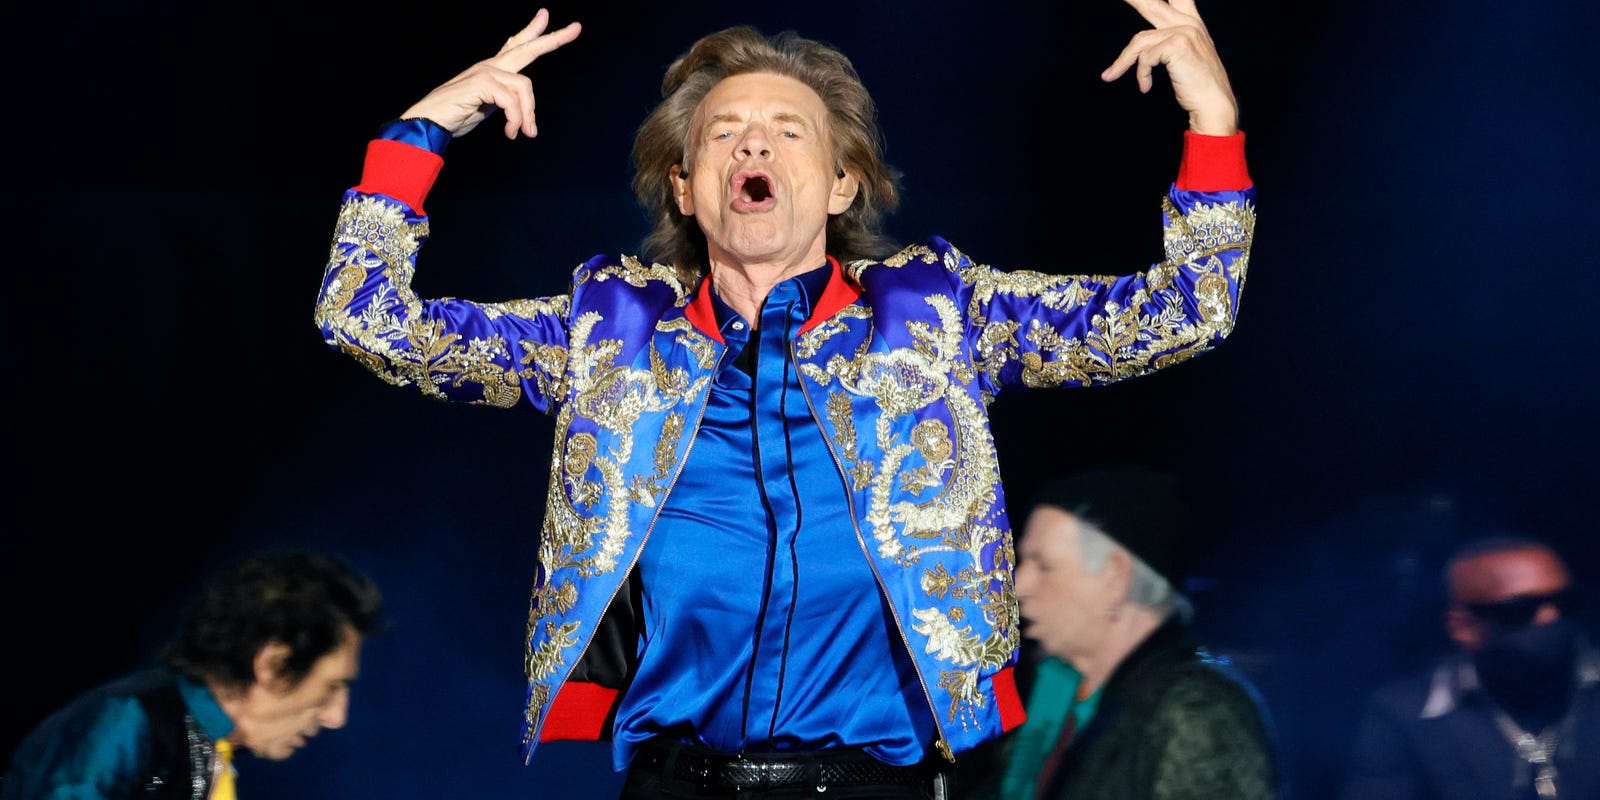 Mick Jagger gets out and about in Detroit ahead of Rolling Stones’ Ford Field show